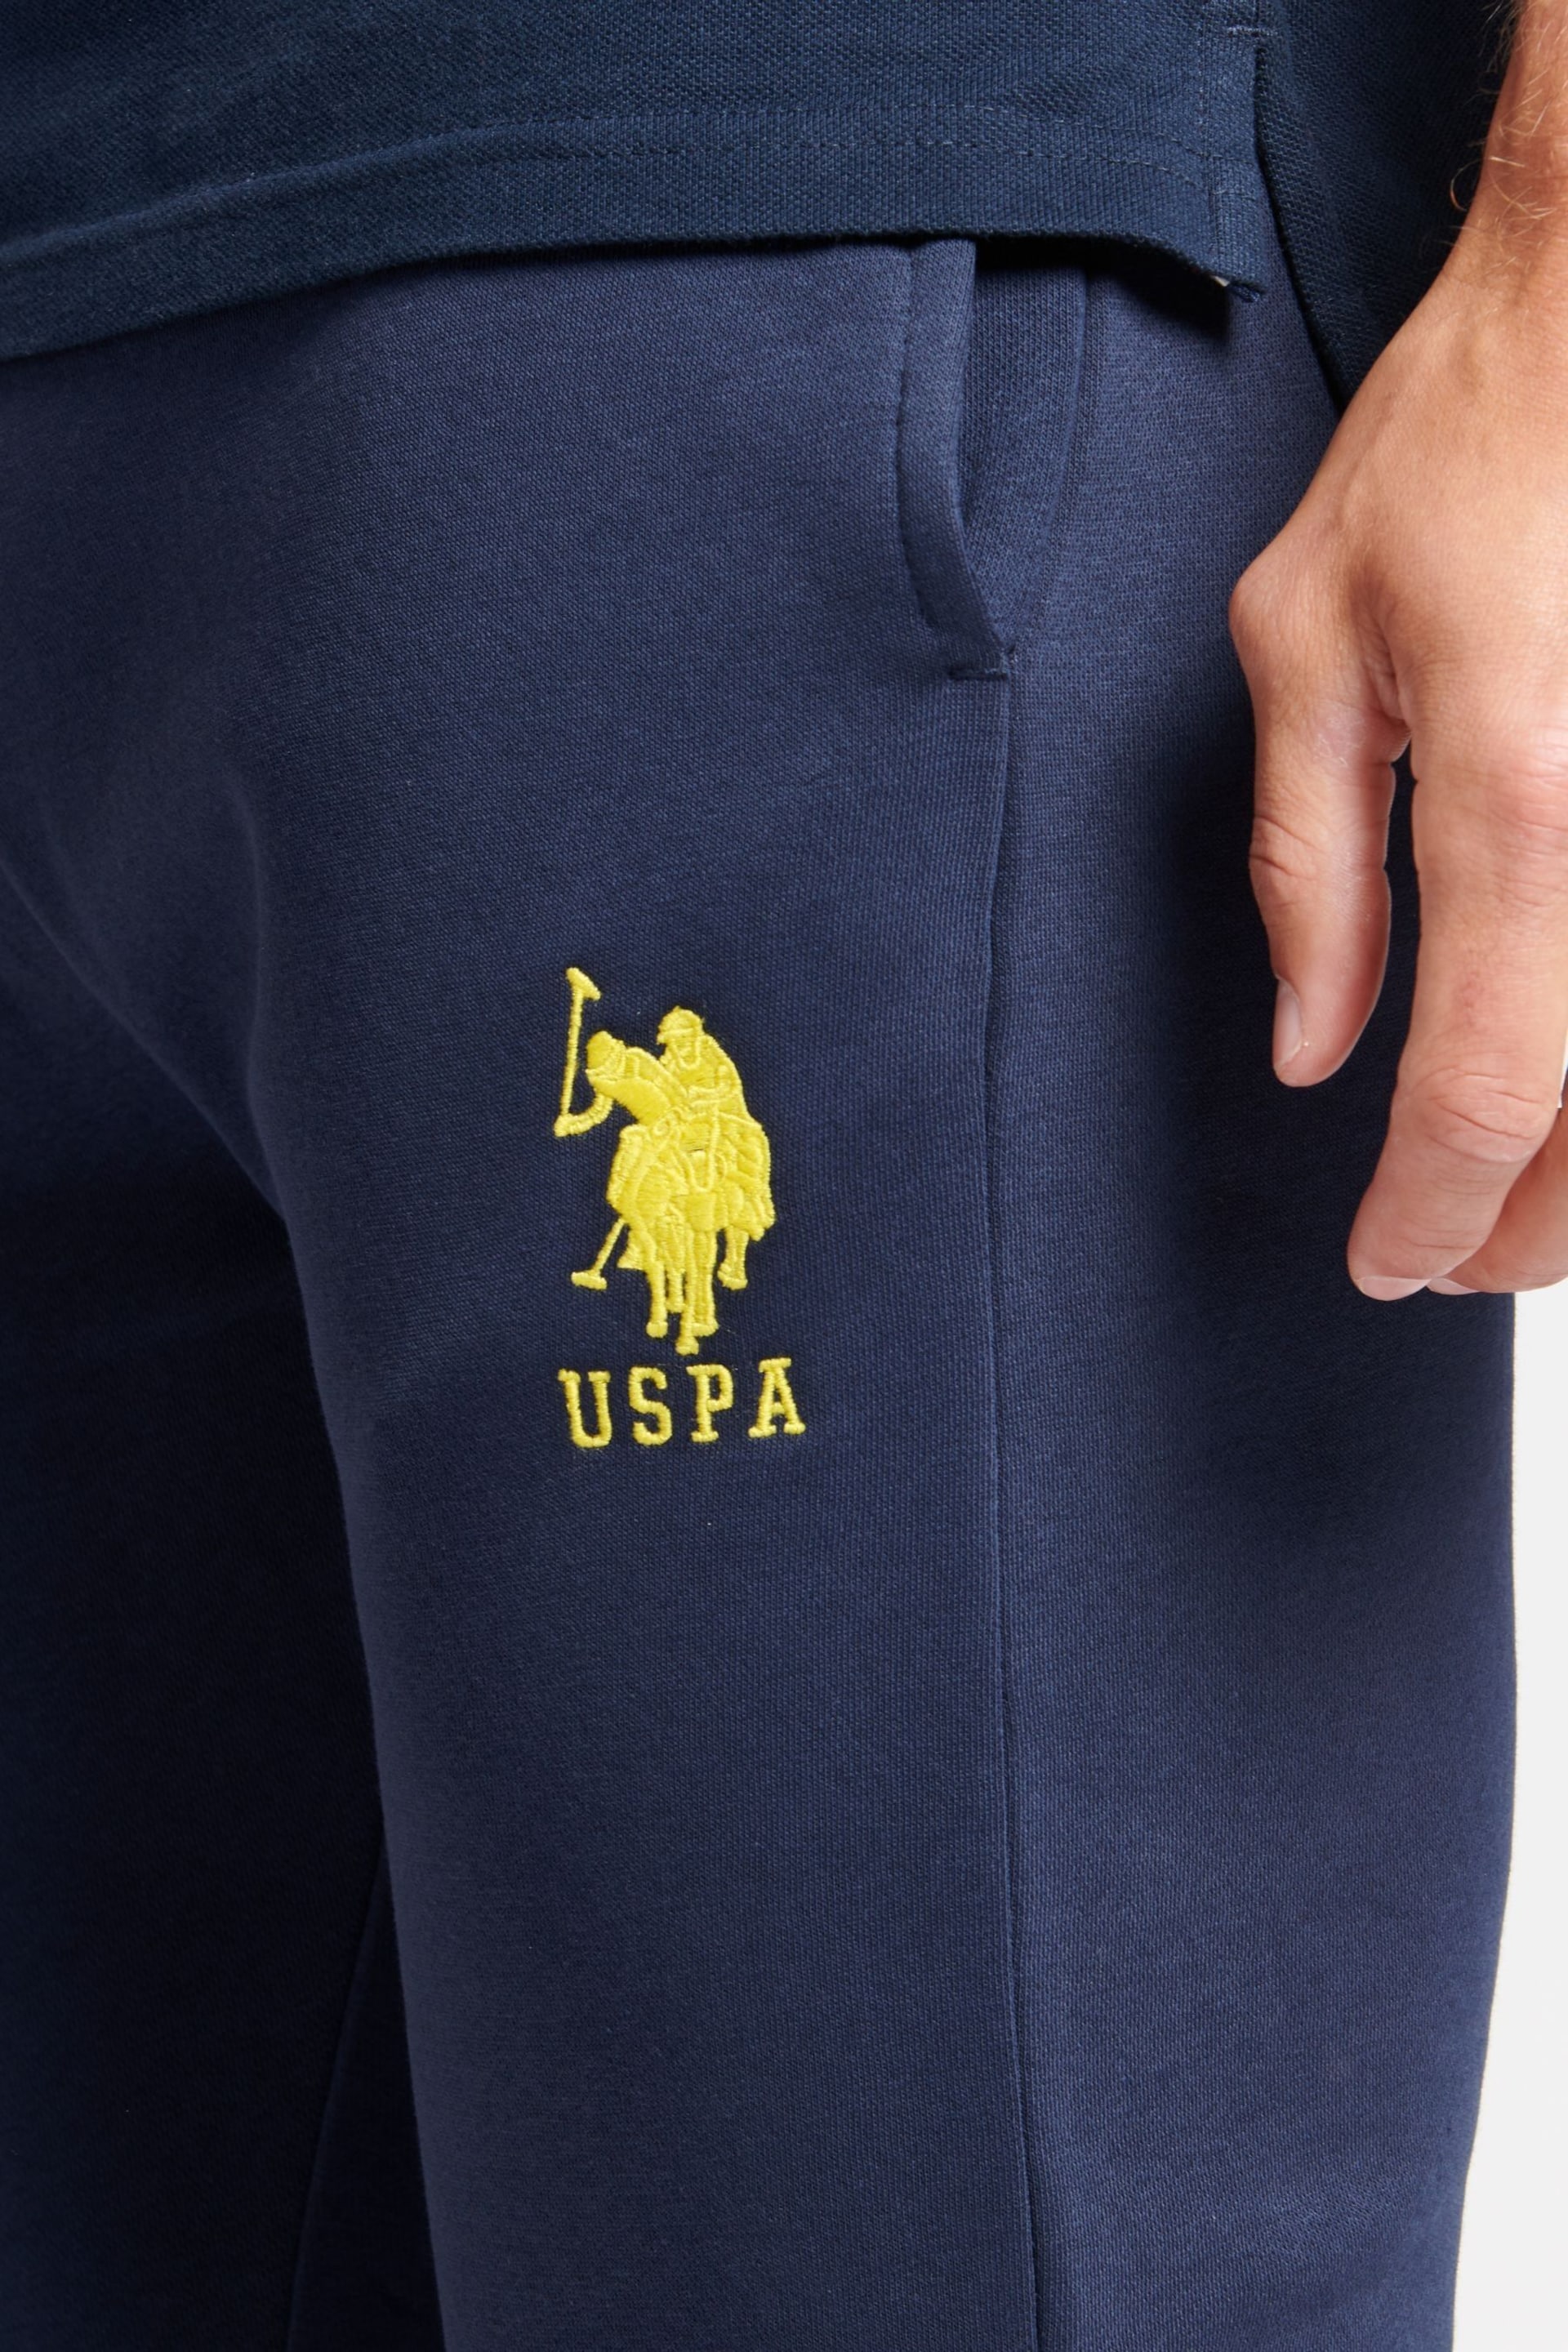 U.S. Polo Assn. Navy Blazer Yellow DHM Player 3 BB Joggers - Image 3 of 3